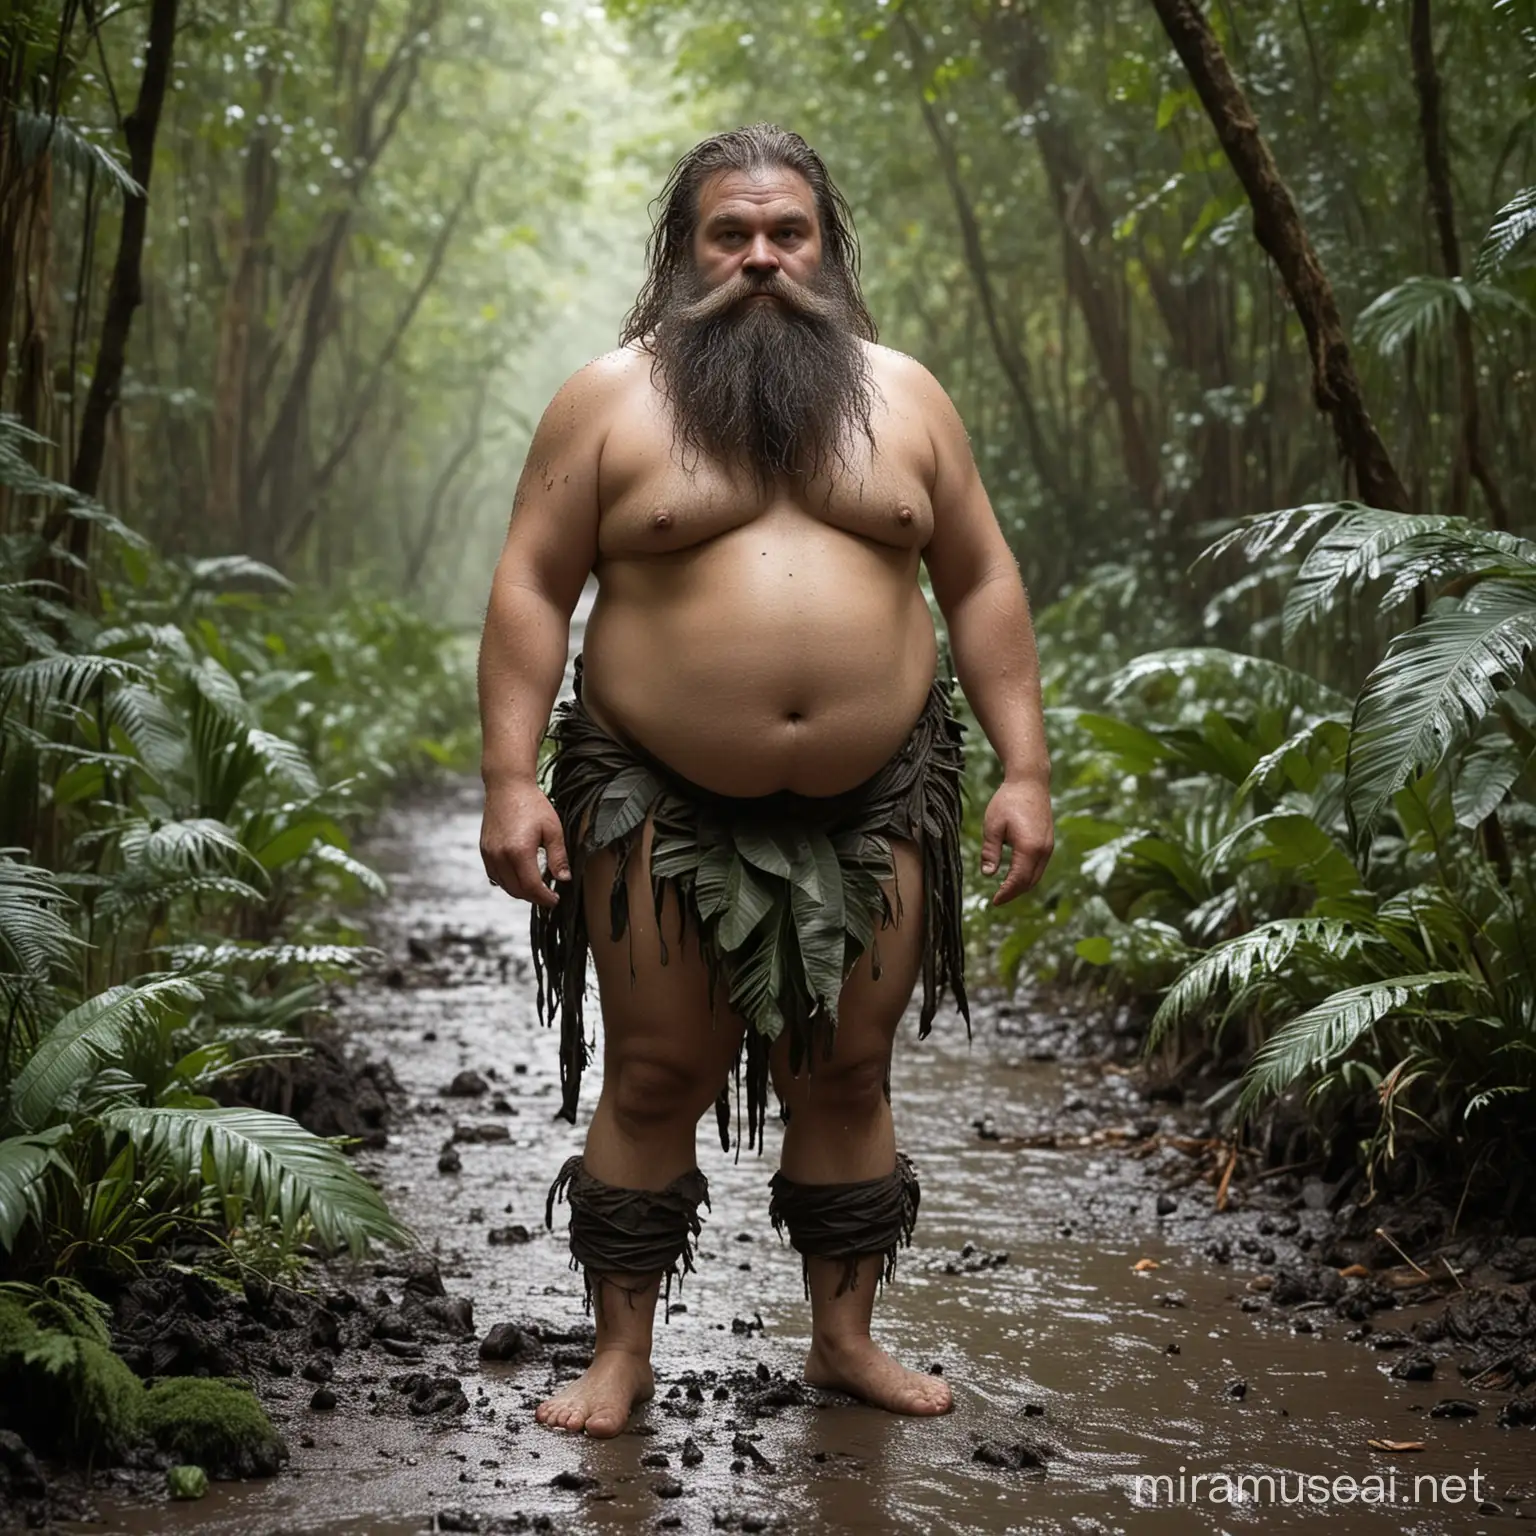 Dwarf, in the forest, on a rainy day, barefoot, wearing a loincloth made of leaves, big feet, big palms,dumpy,chubby, thicken hair, rough skin, black mud everywhere, primitive,